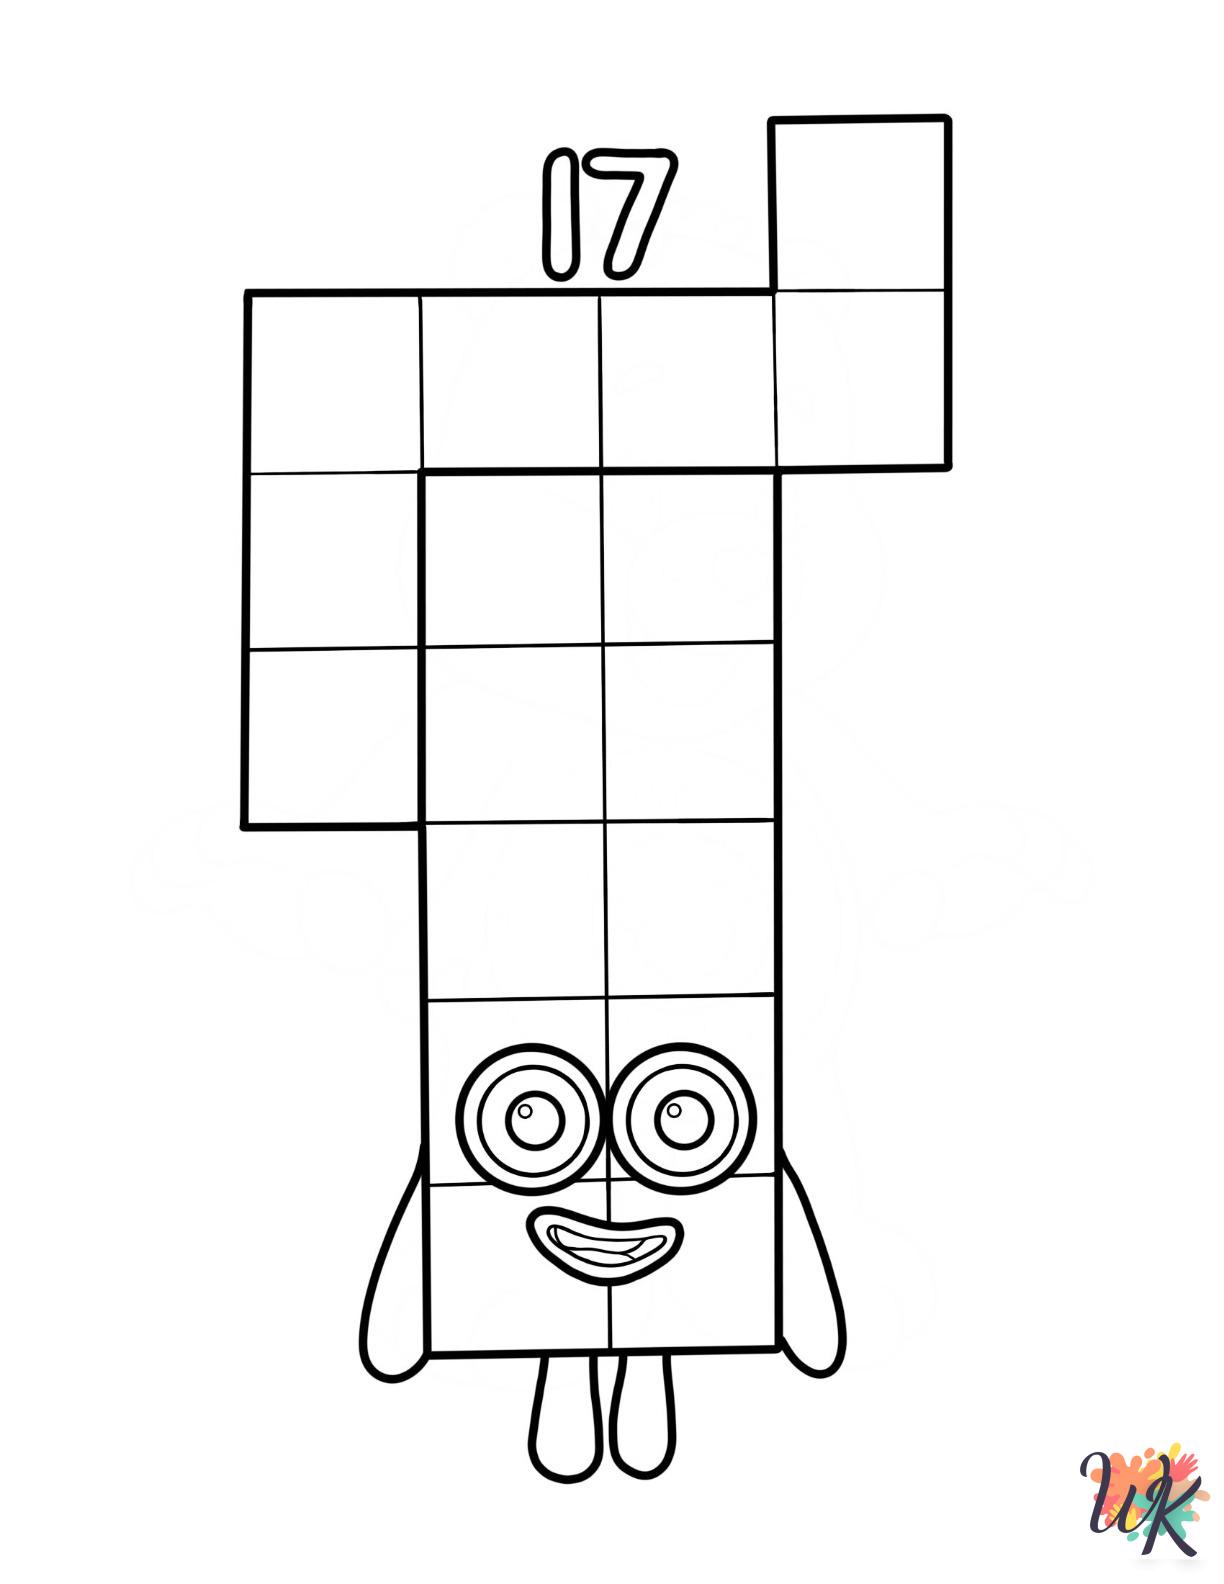 Numberblocks coloring book pages